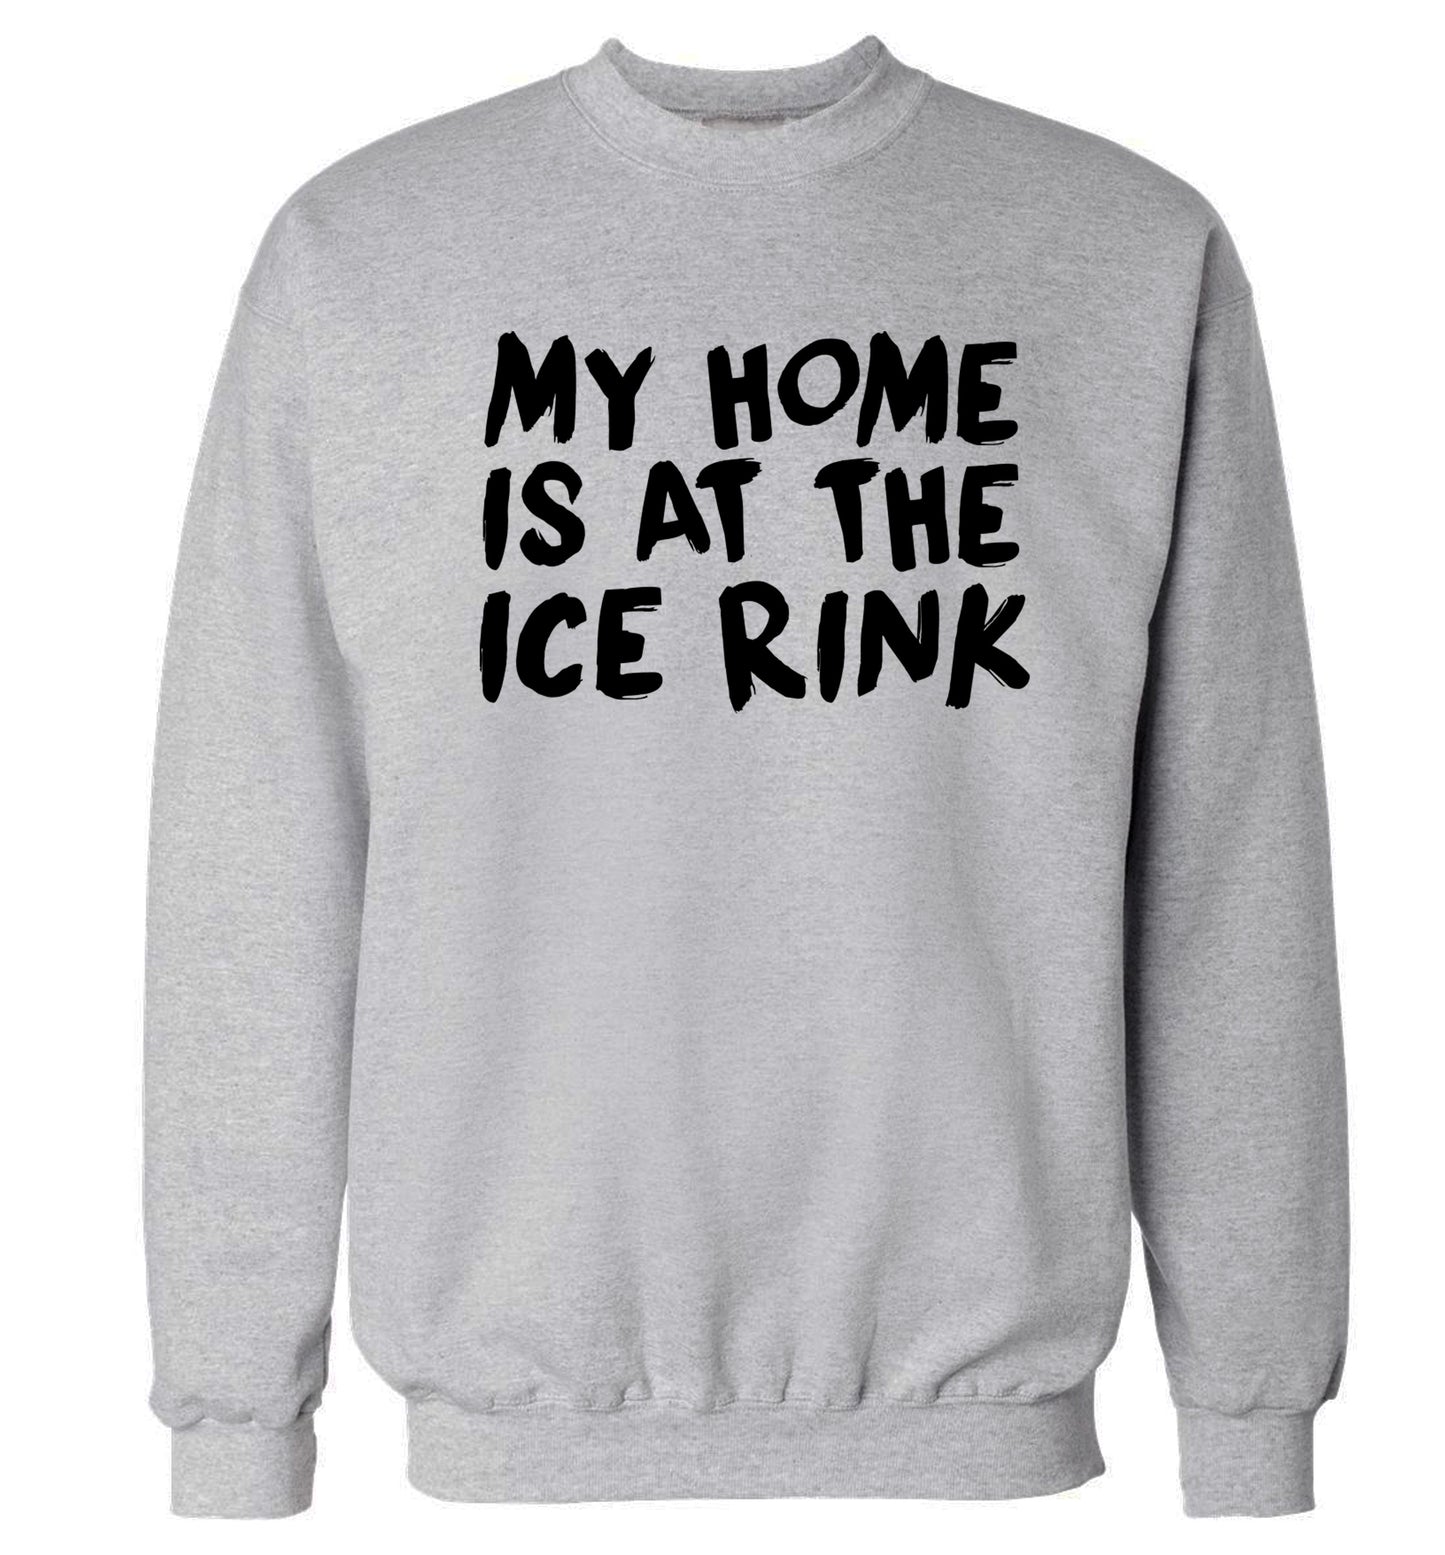 My home is at the ice rink Adult's unisex grey Sweater 2XL